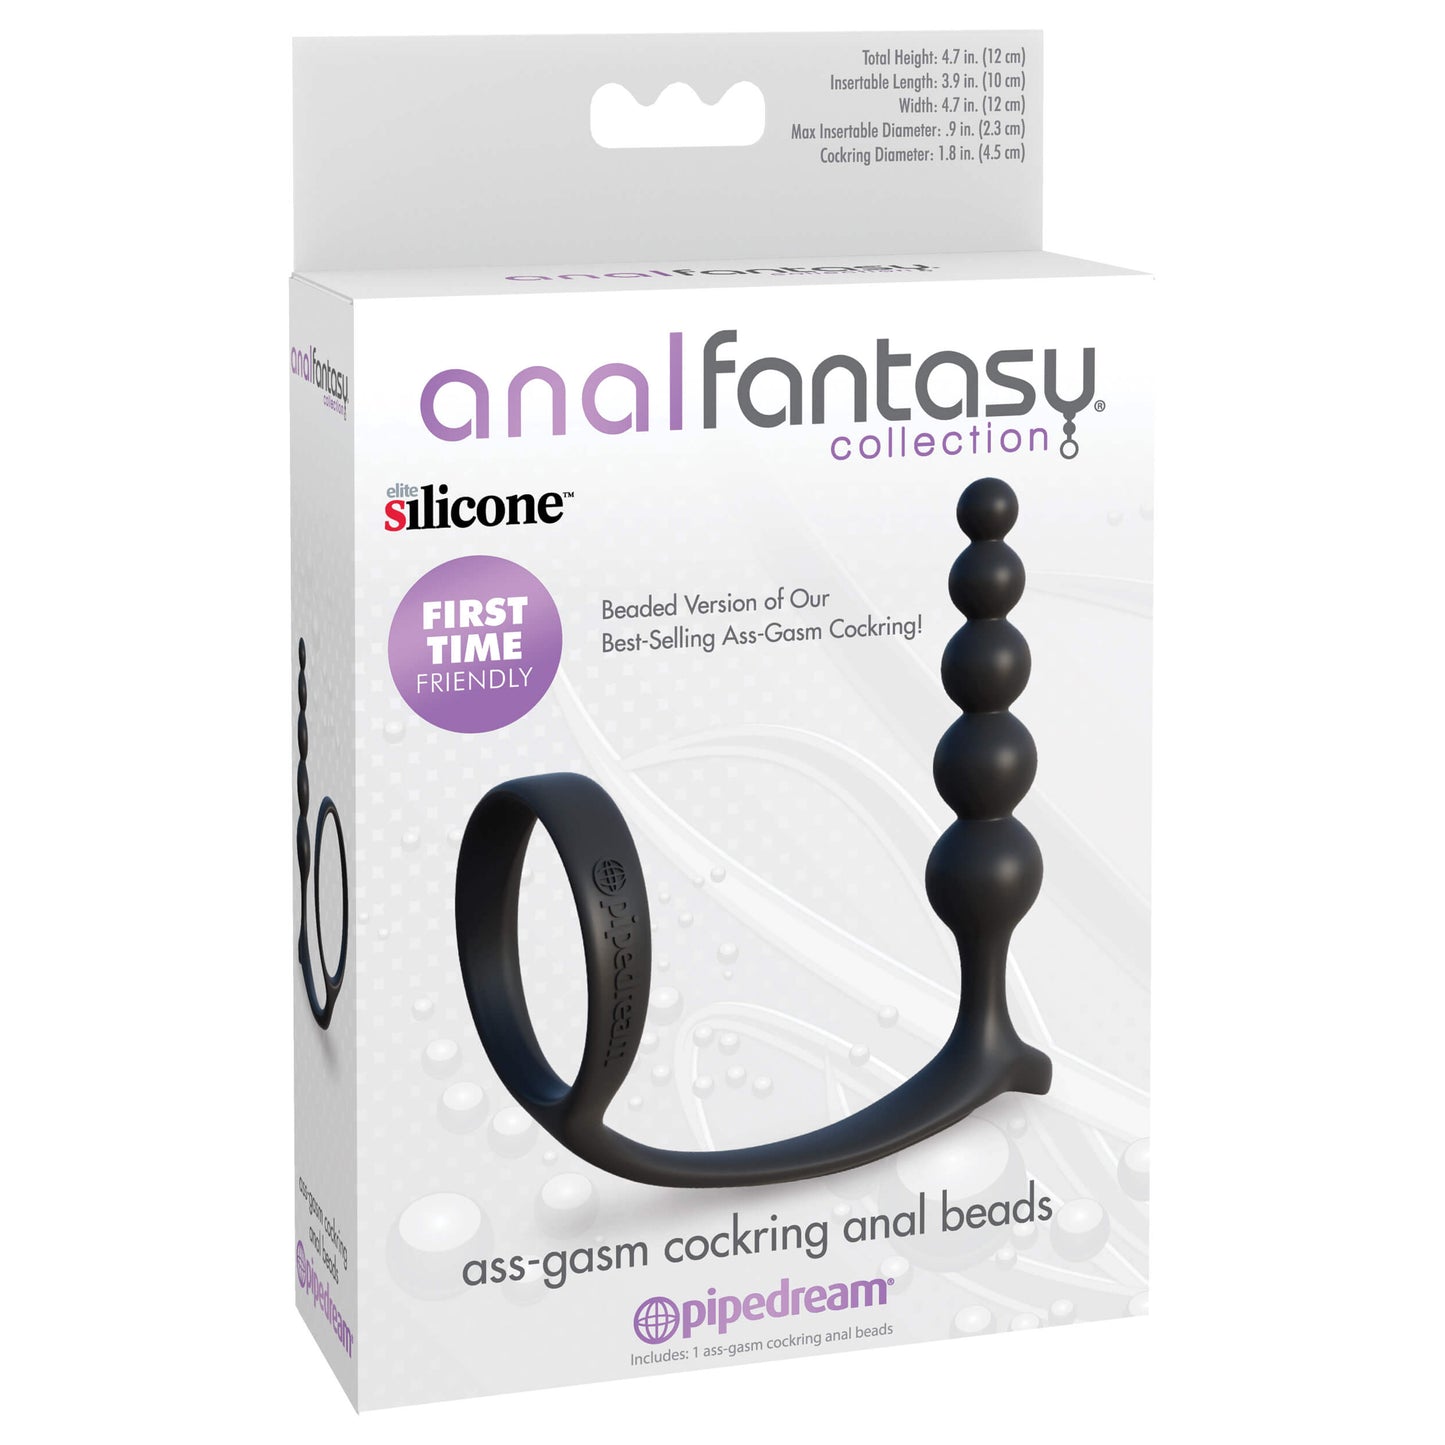 Anal Fantasy Collection Ass-gasm Cockring Anal Beads - Thorn & Feather